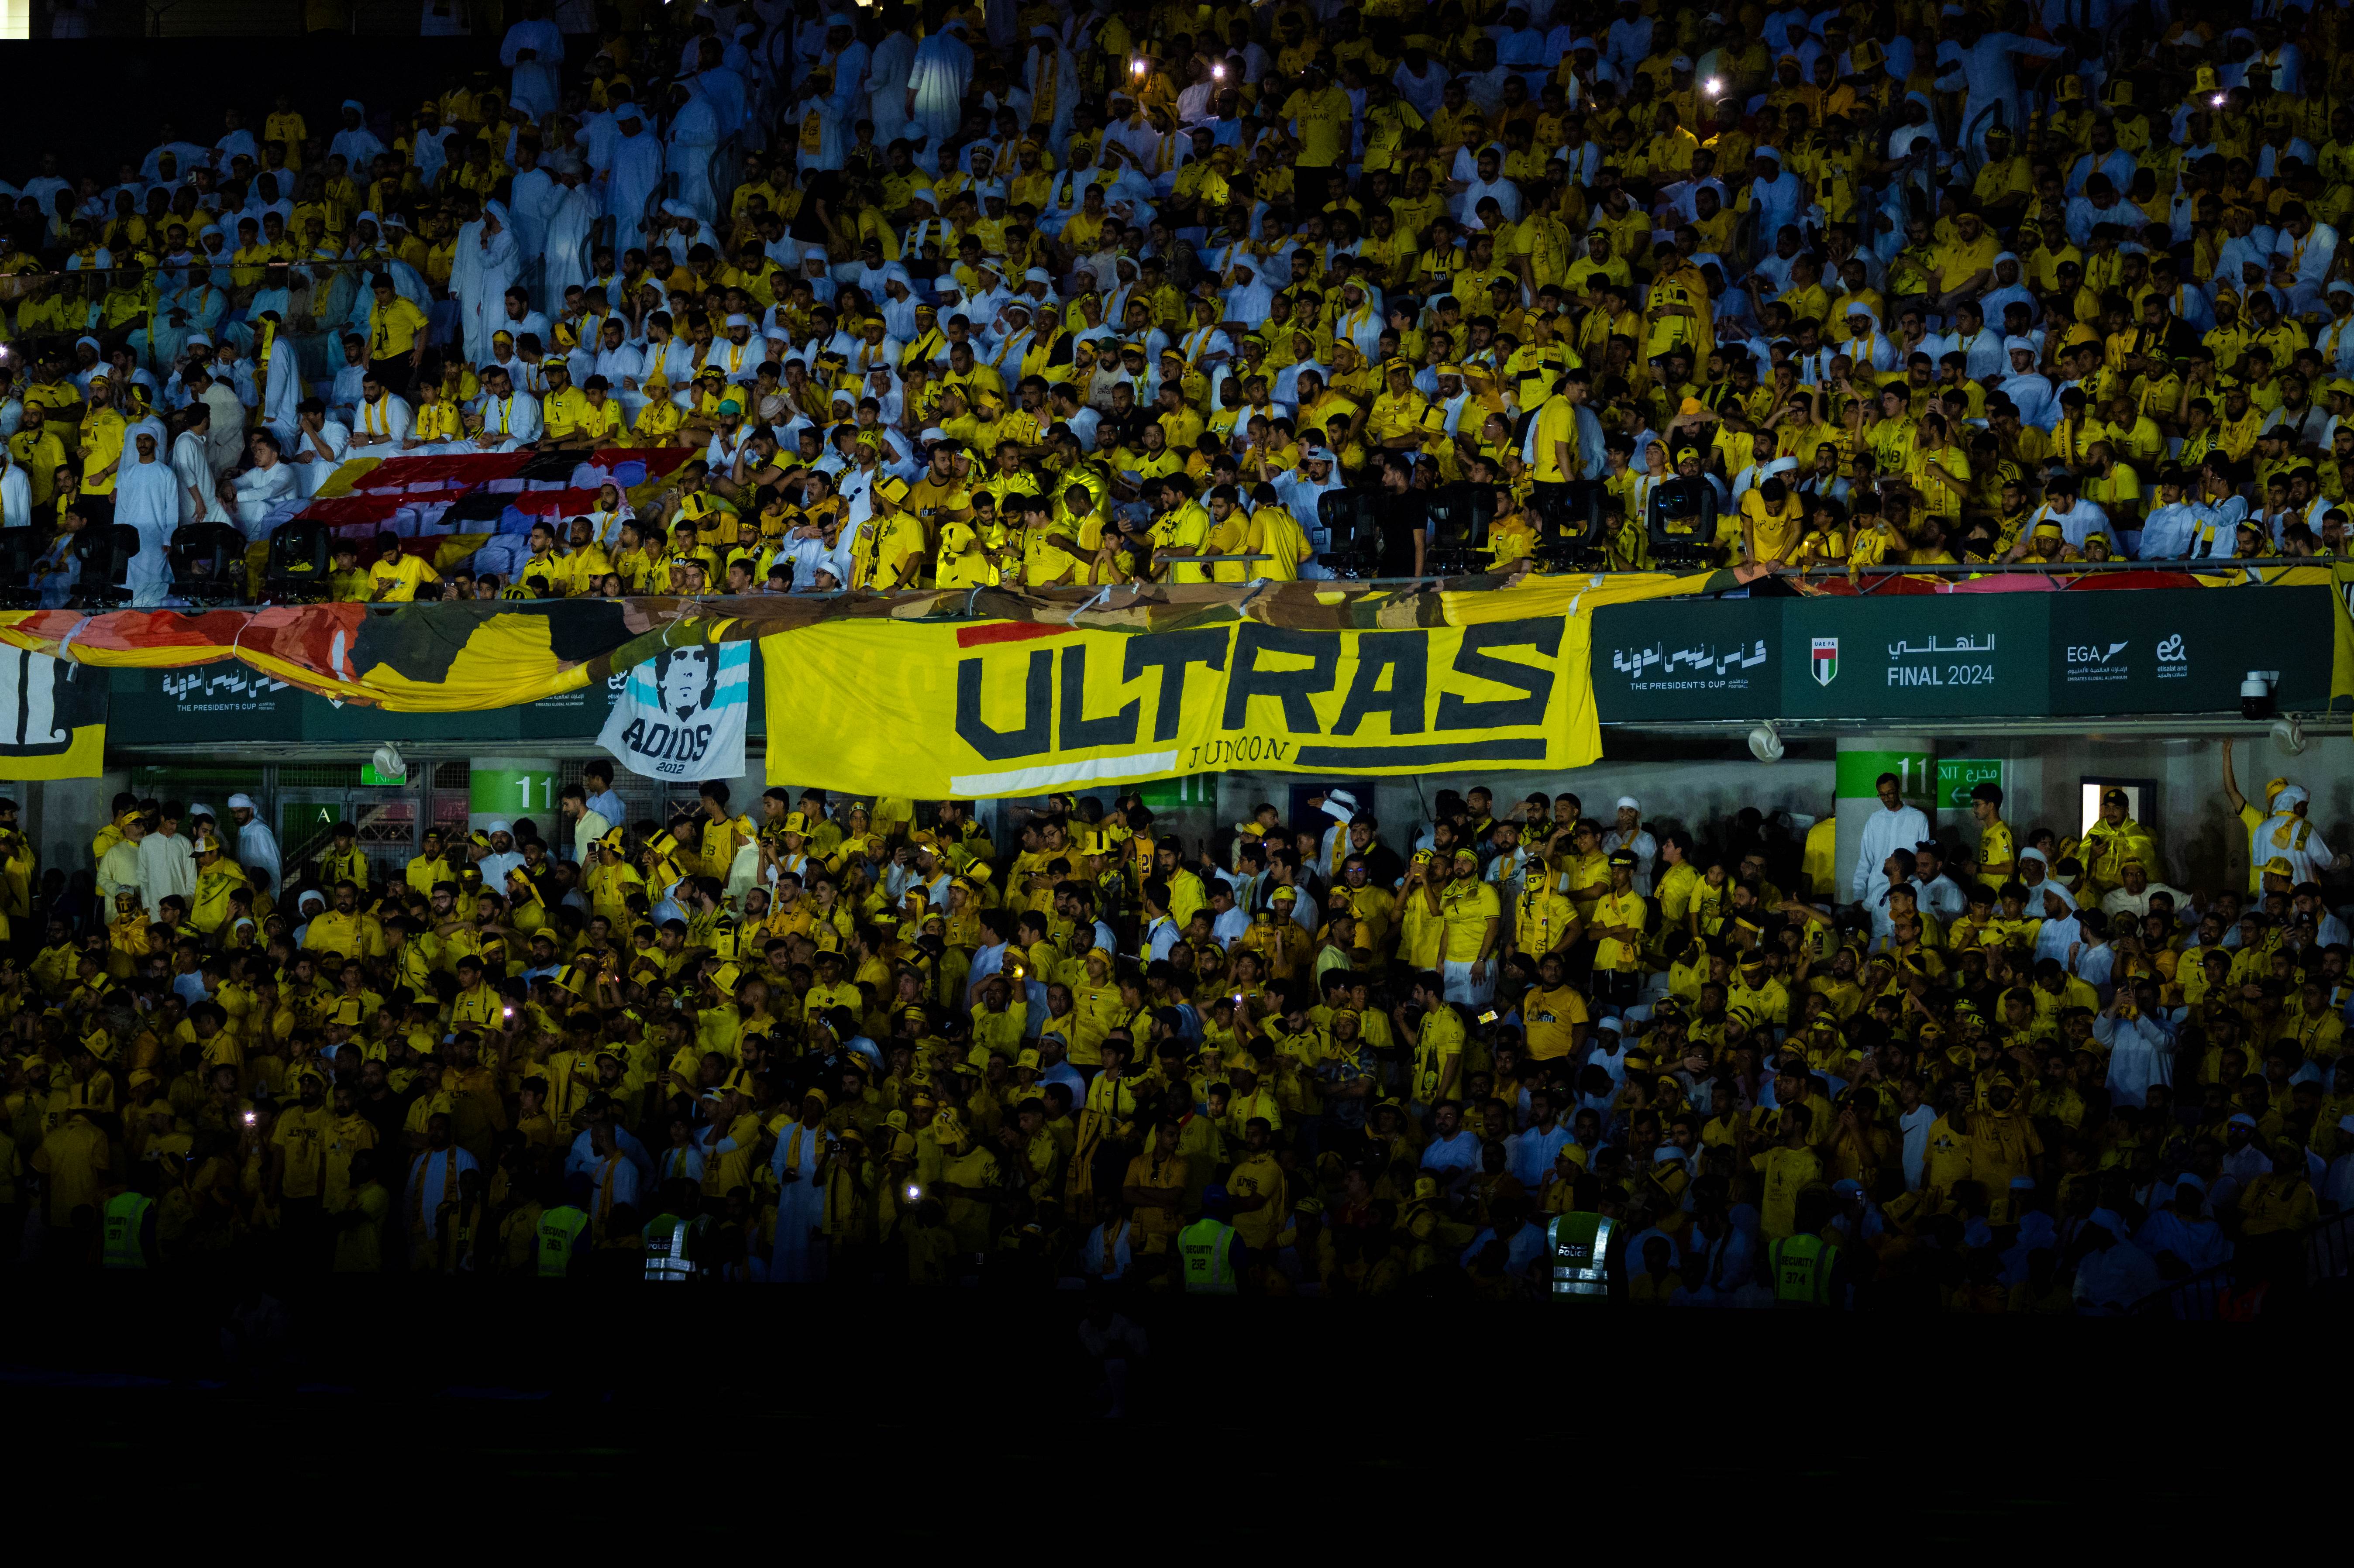 Al Wasl Fans Decorate the Stadium with their iconic colors